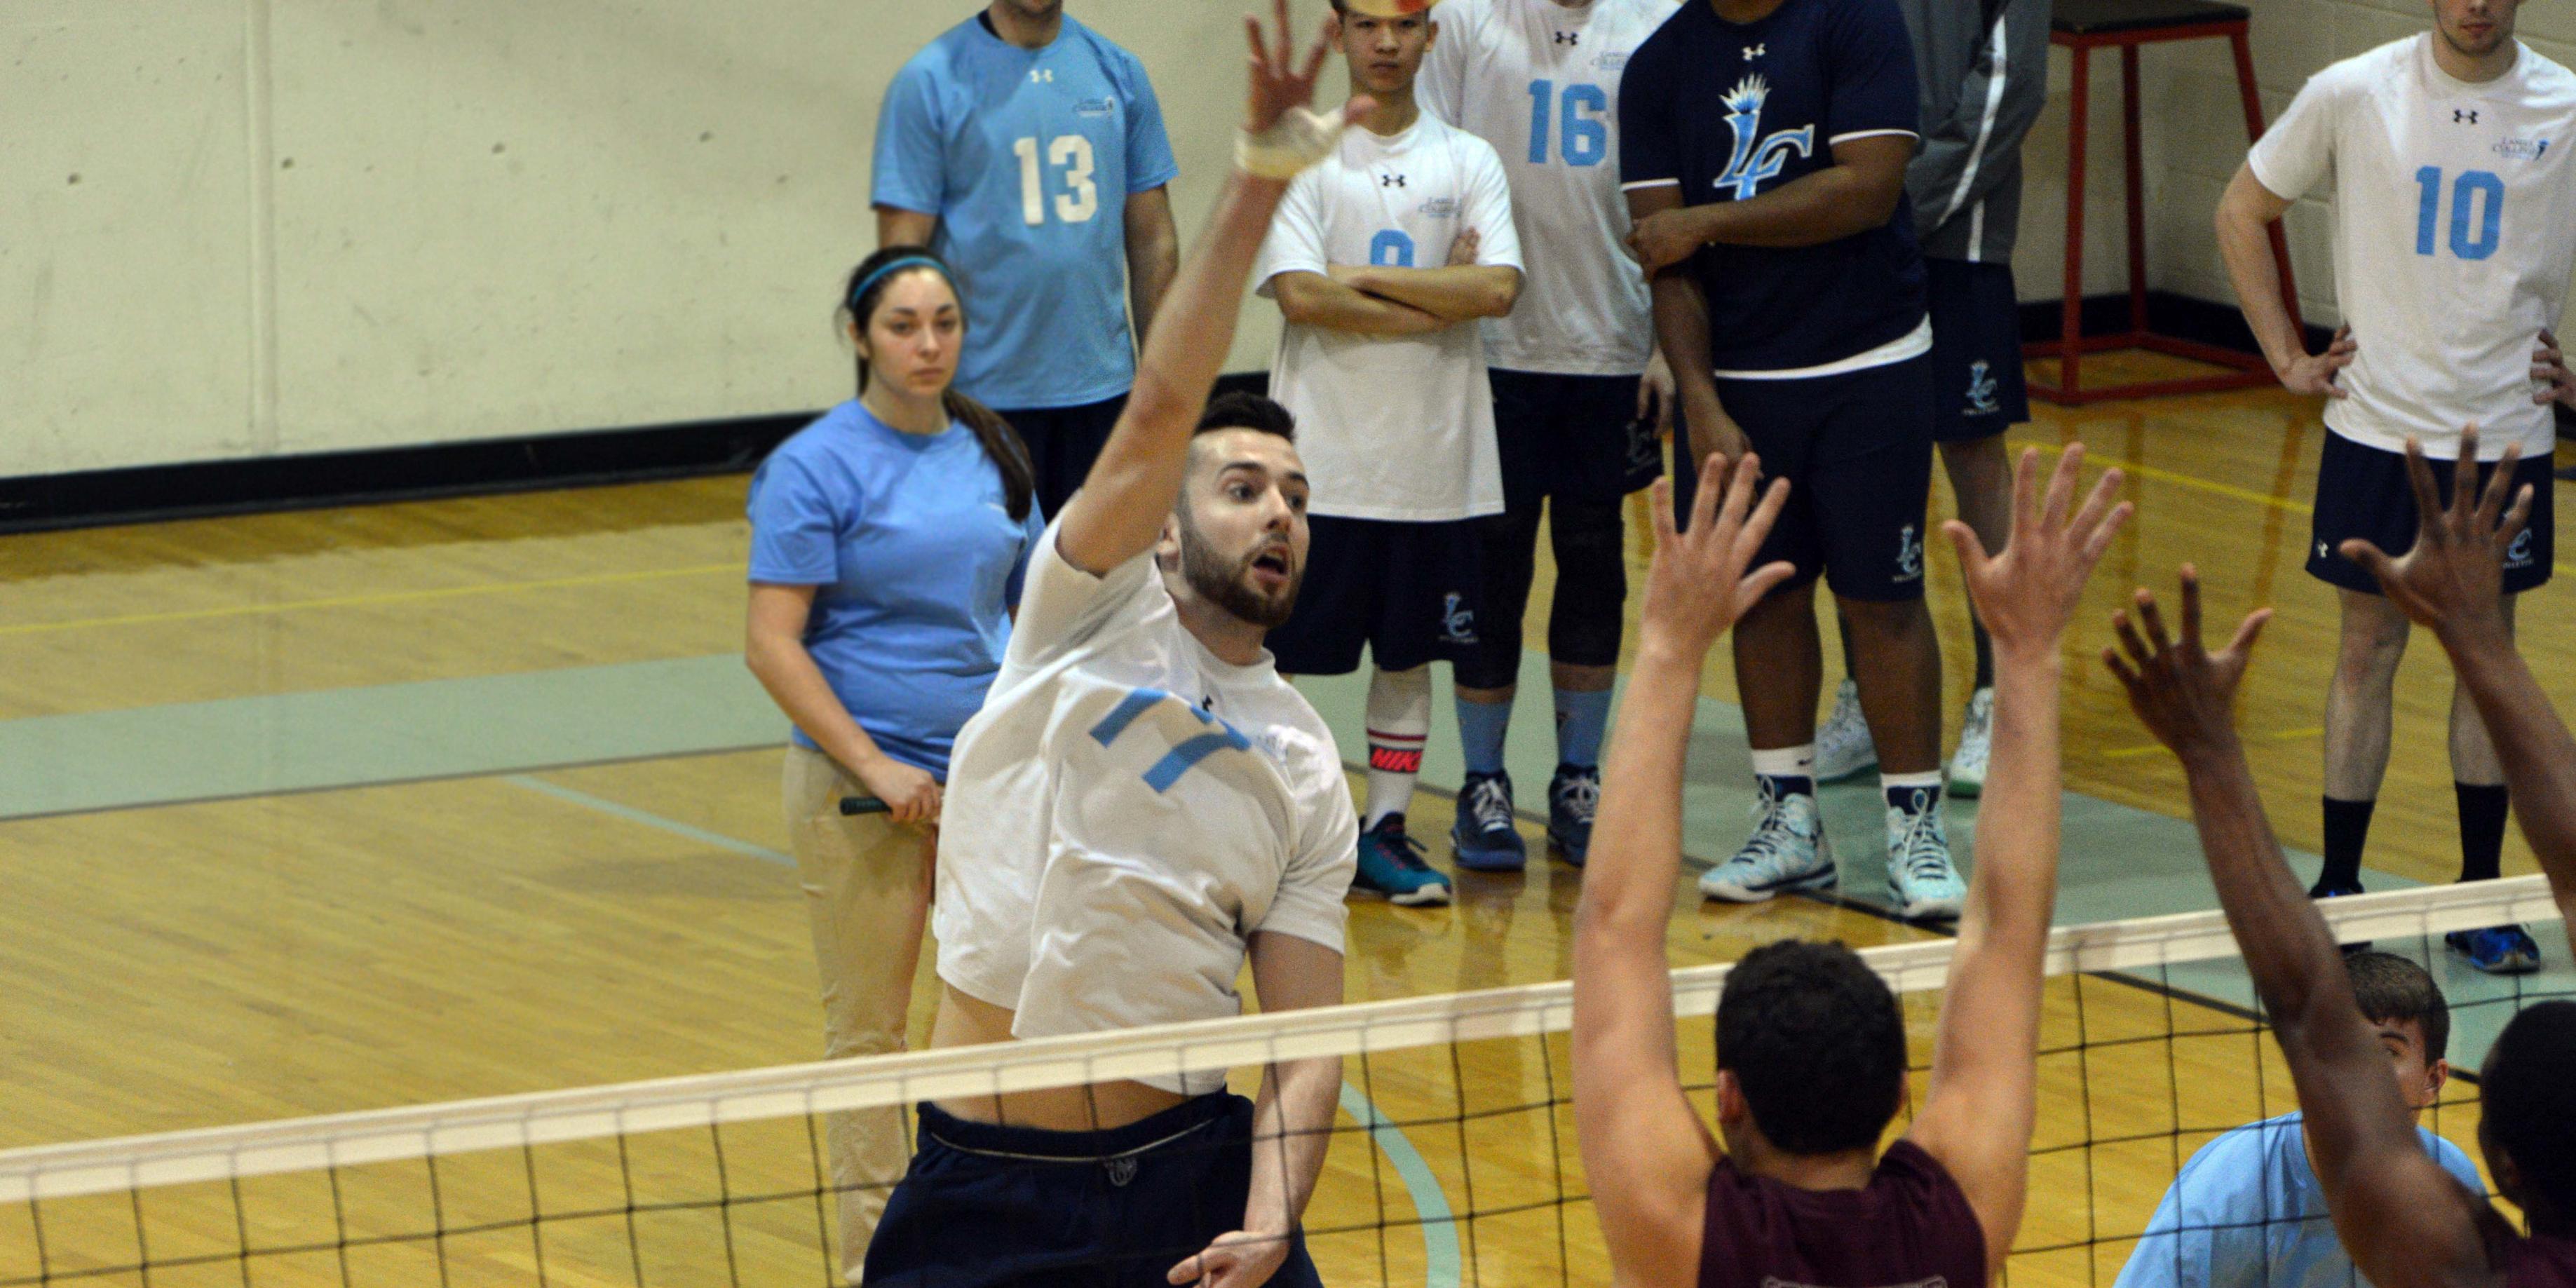 Men's Volleyball Tops Wentworth 3-1